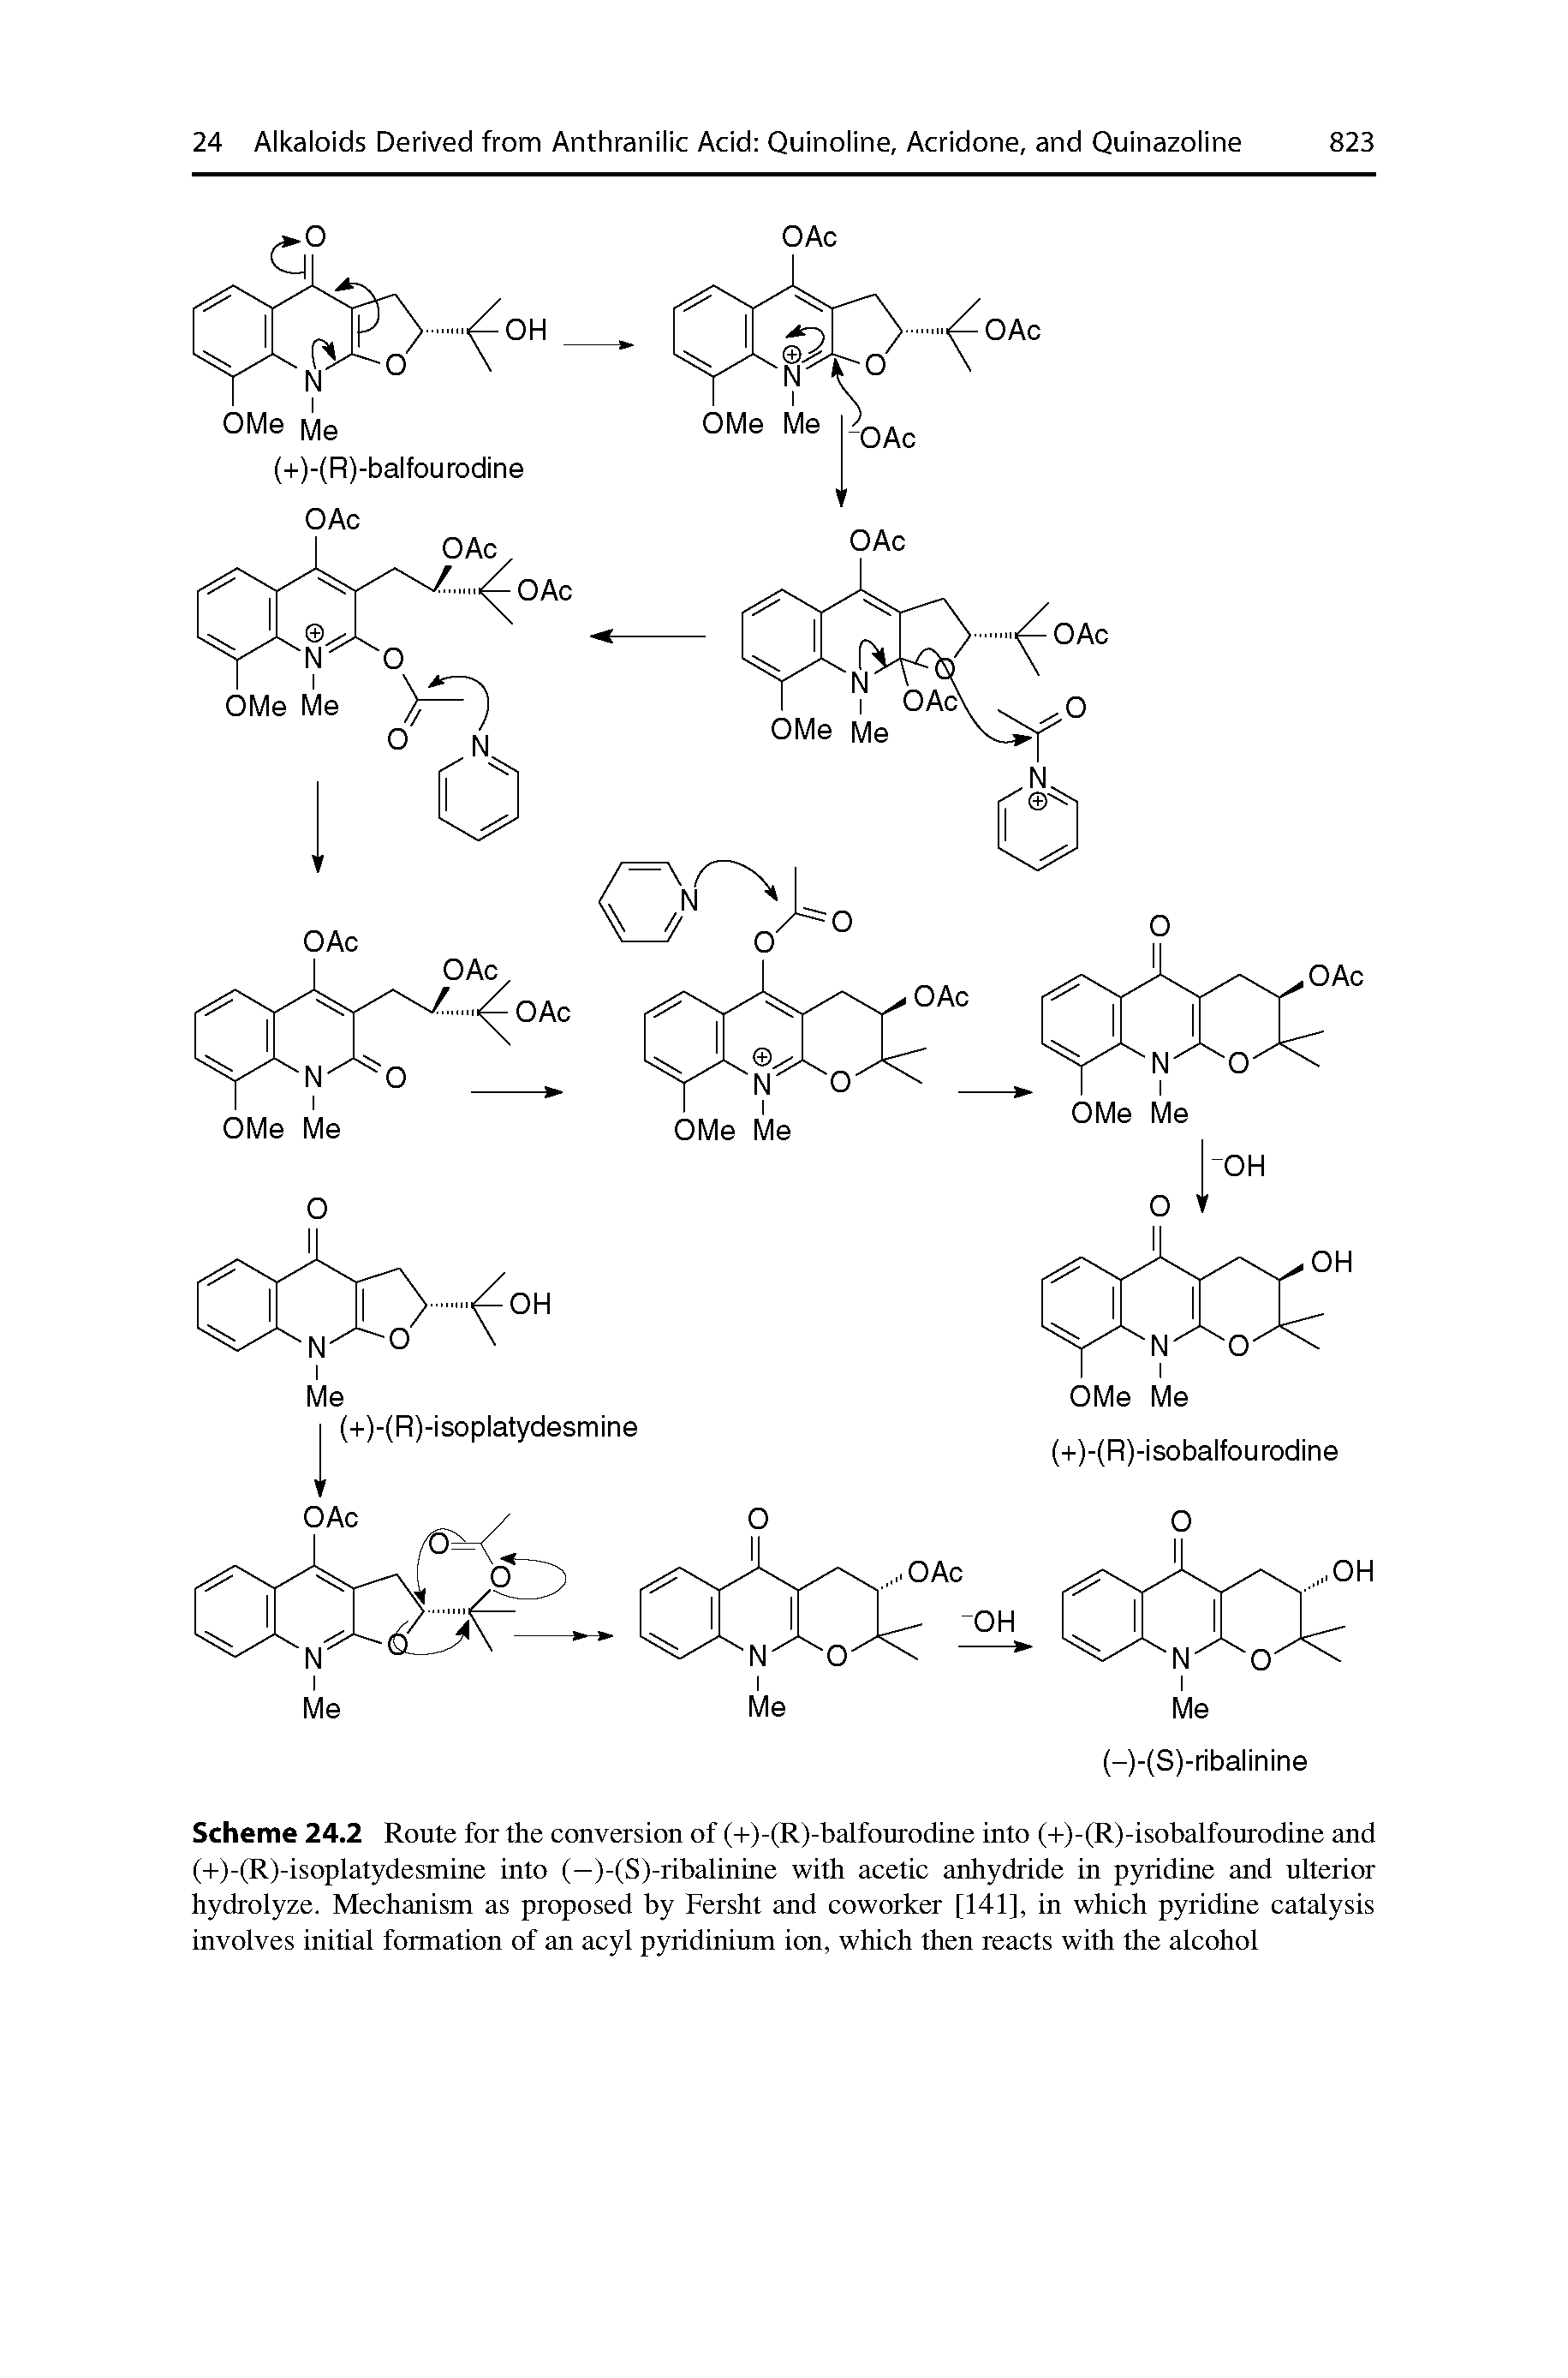 Scheme 24.2 Route for the conversion of (+)-(R)-balfourodine into (+)-(R)-isobalfourodine and (+)-(R)-isoplatydesmine into (—)-(S)-ribalinine with acetic anhydride in pyridine and ulterior hydrolyze. Mechanism as proposed by Fersht and coworker [141], in which pyridine catalysis involves initial formation of an acyl pyridinium ion, which then reacts with the alcohol...